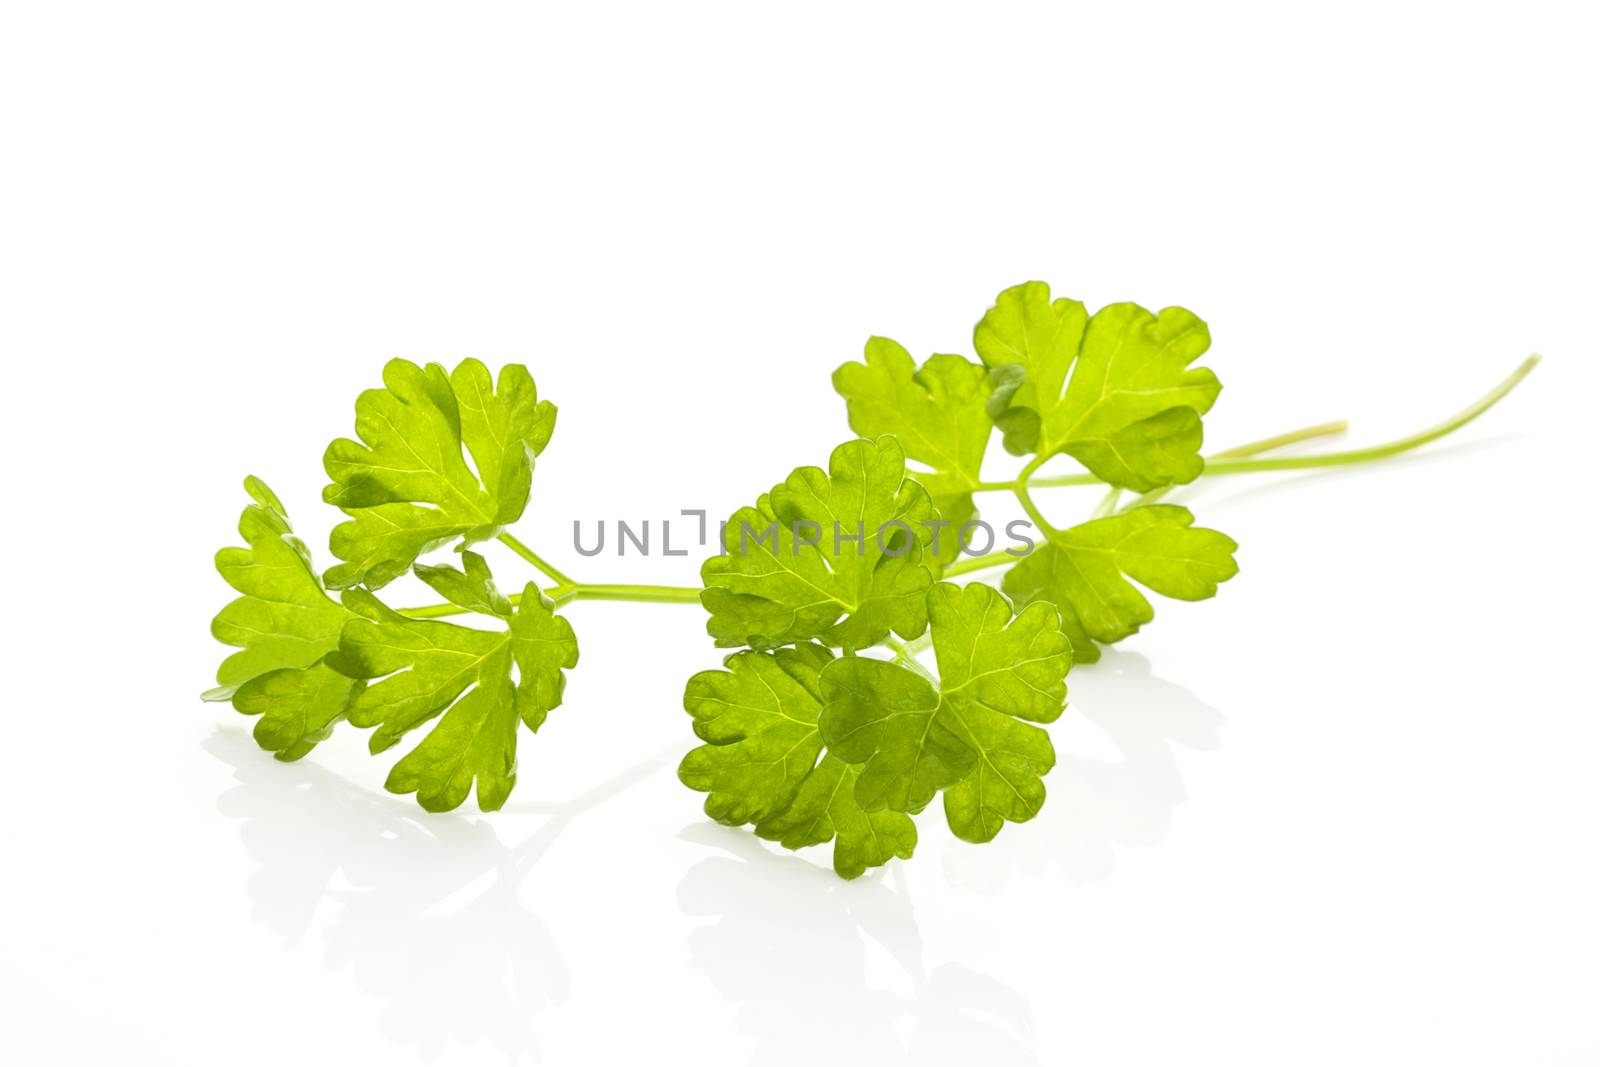 Fresh parsley leaves isolated on white background. Culinary aromatic herbs.